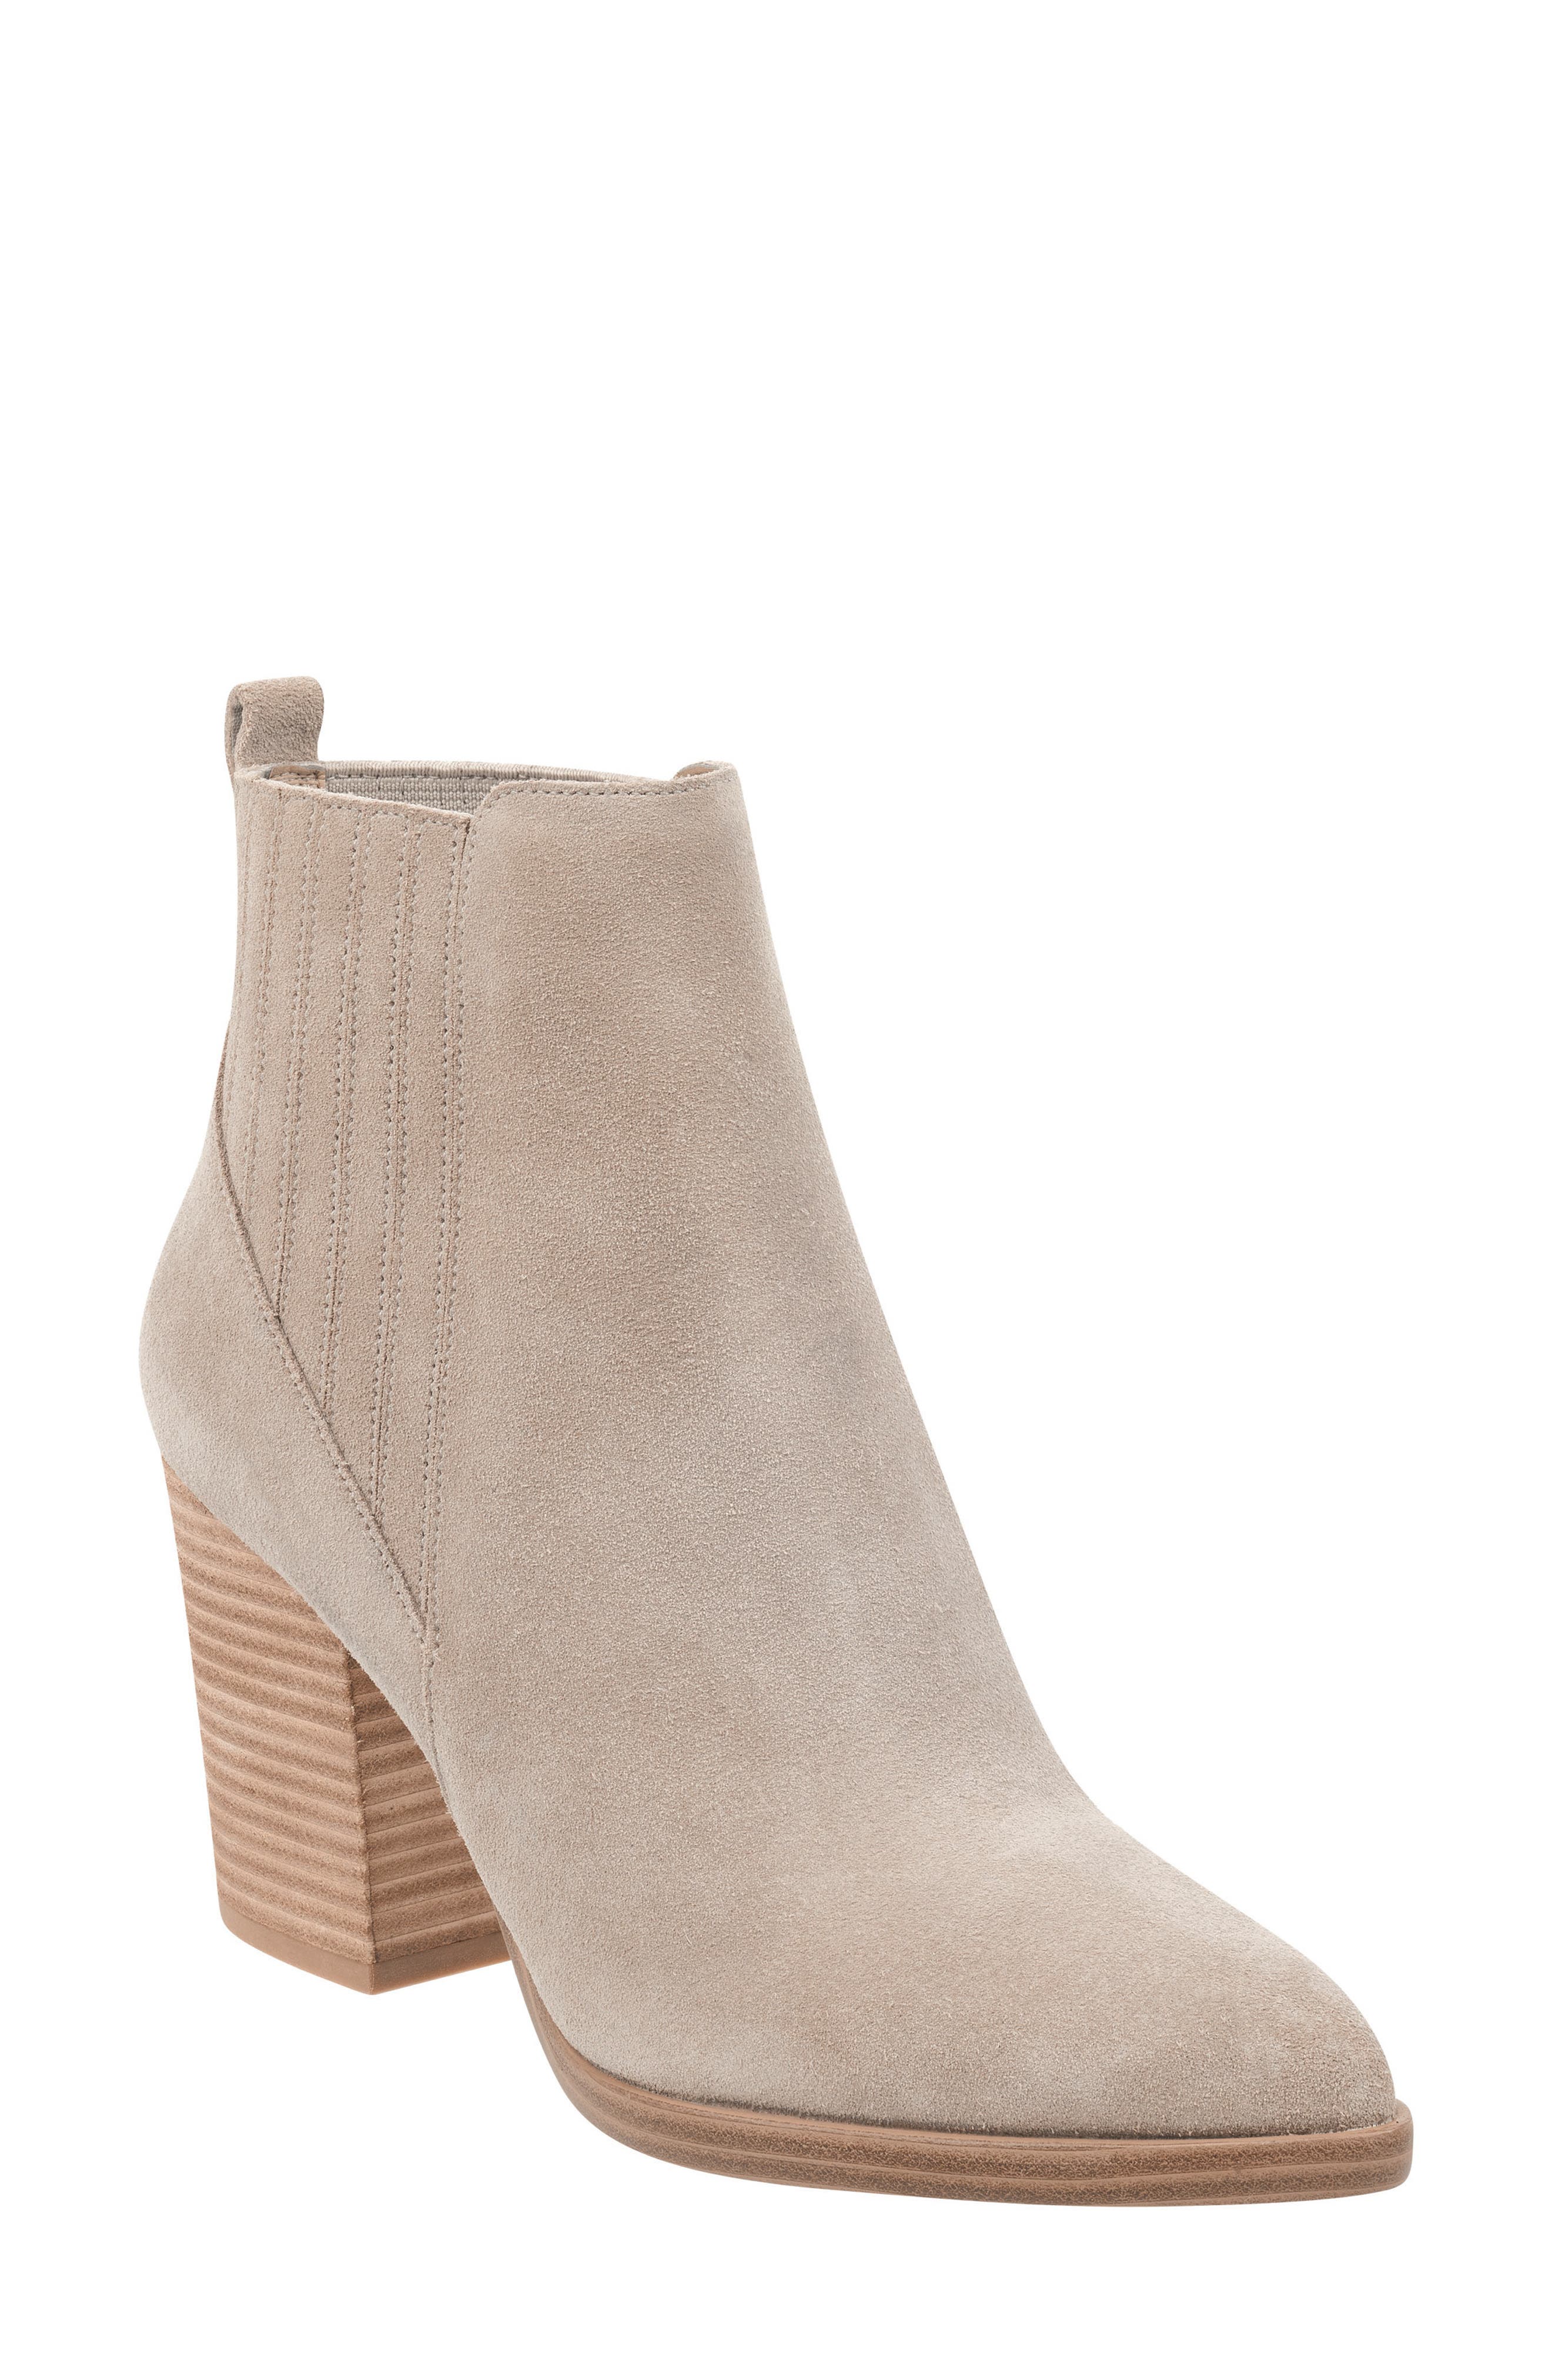 white marc fisher booties